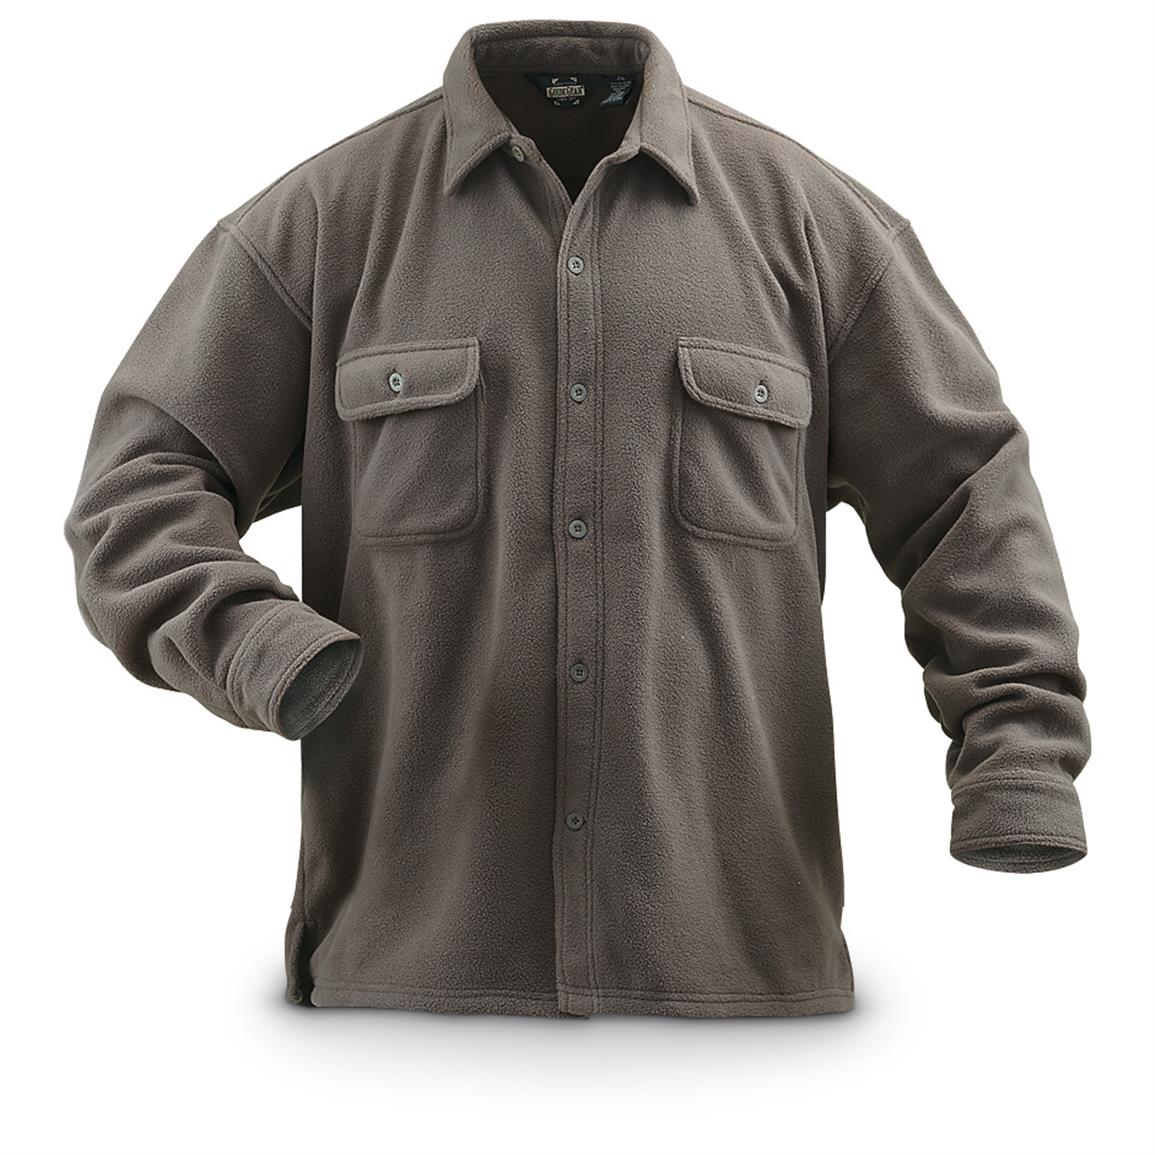 Guide Gear Men's CPO Shirt - 293306, Shirts at Sportsman's Guide